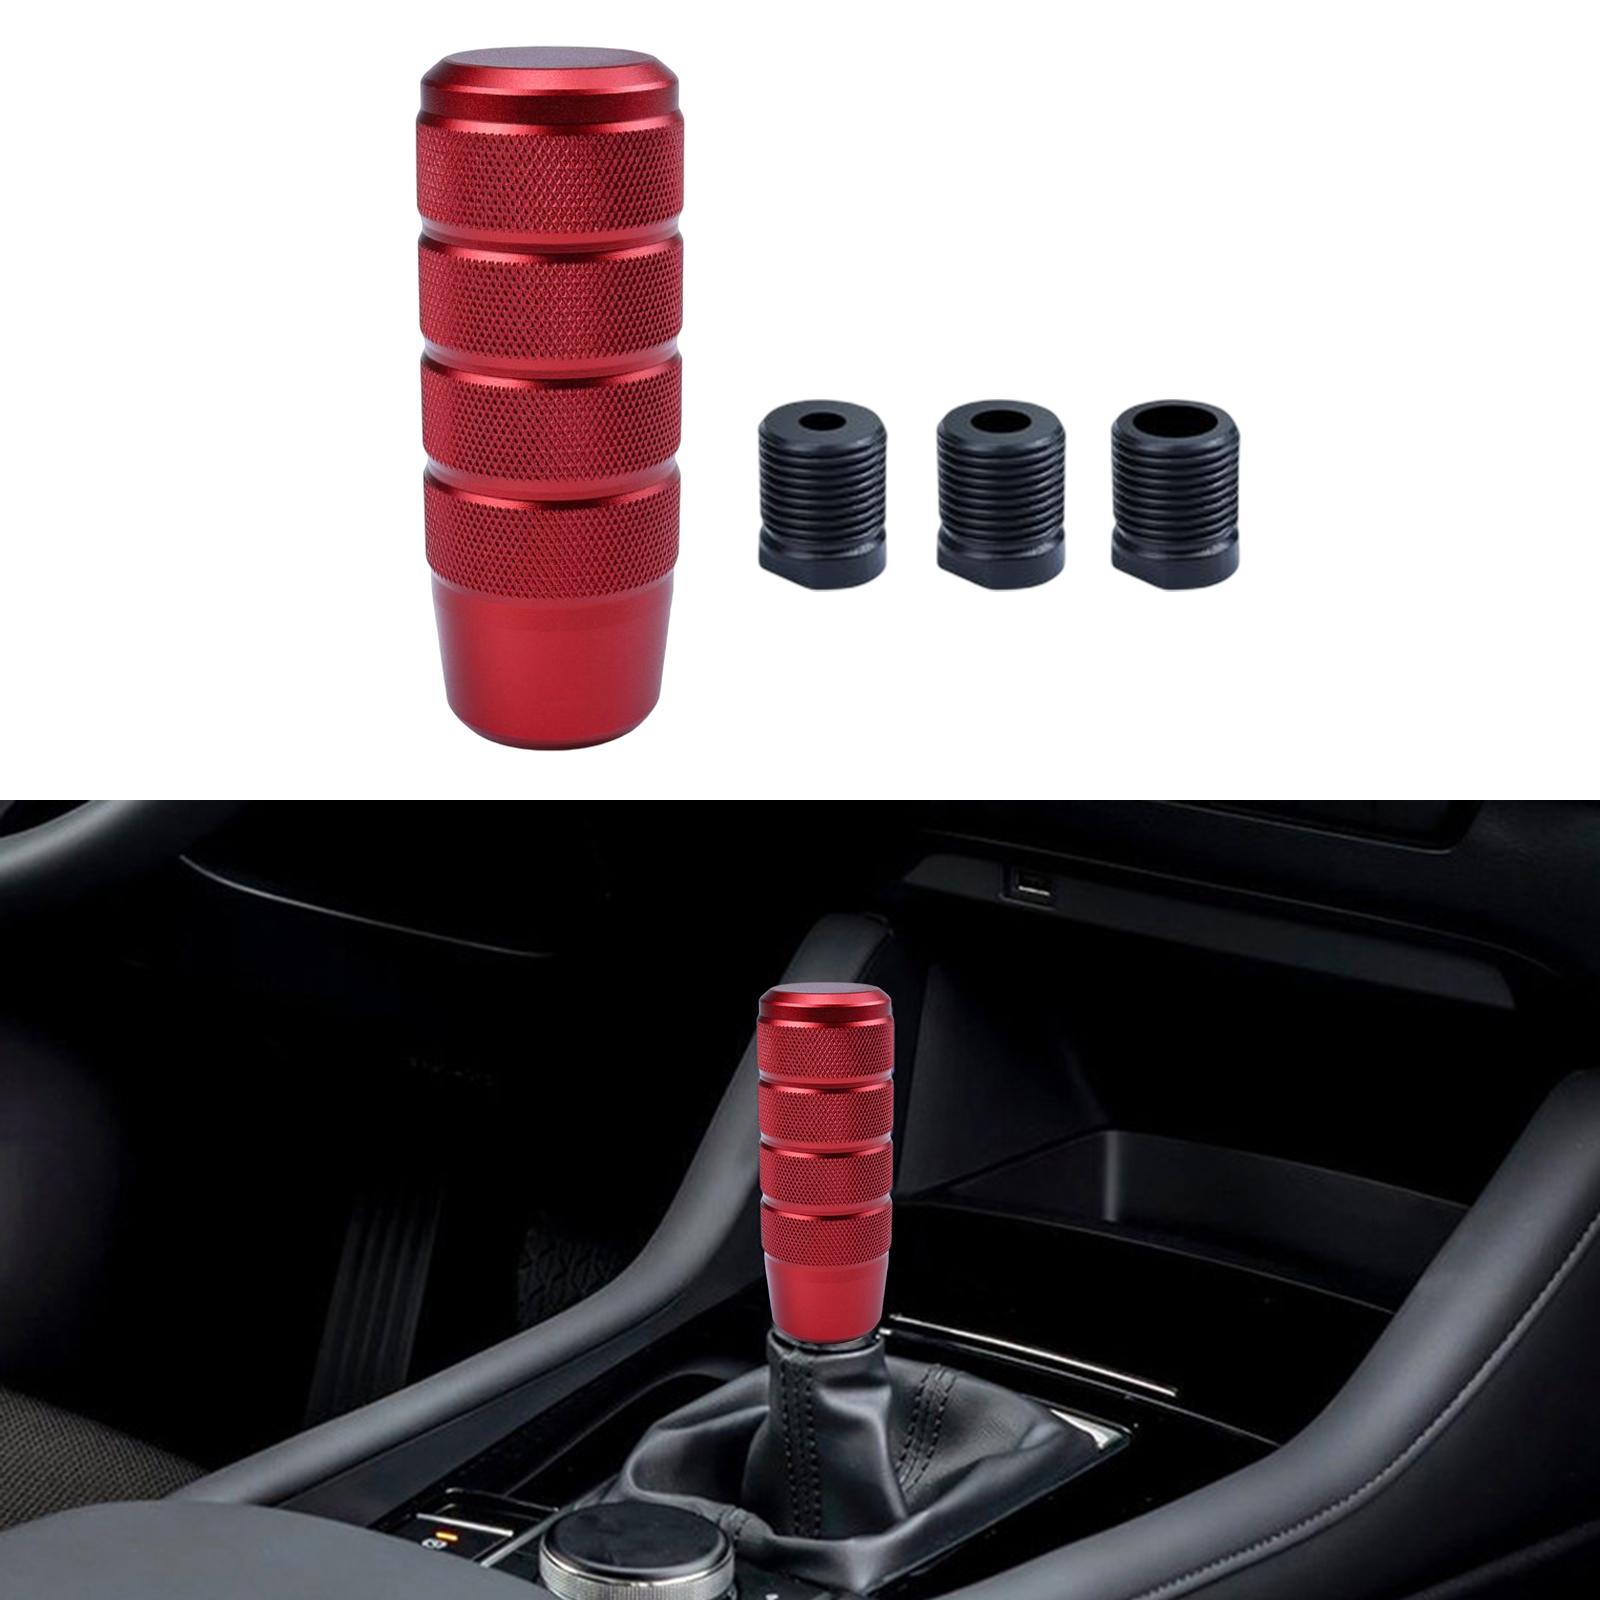 Car Aluminum Alloy Gear Shift Knobs for Cars, Trucks, Buses, SUV Durable Red